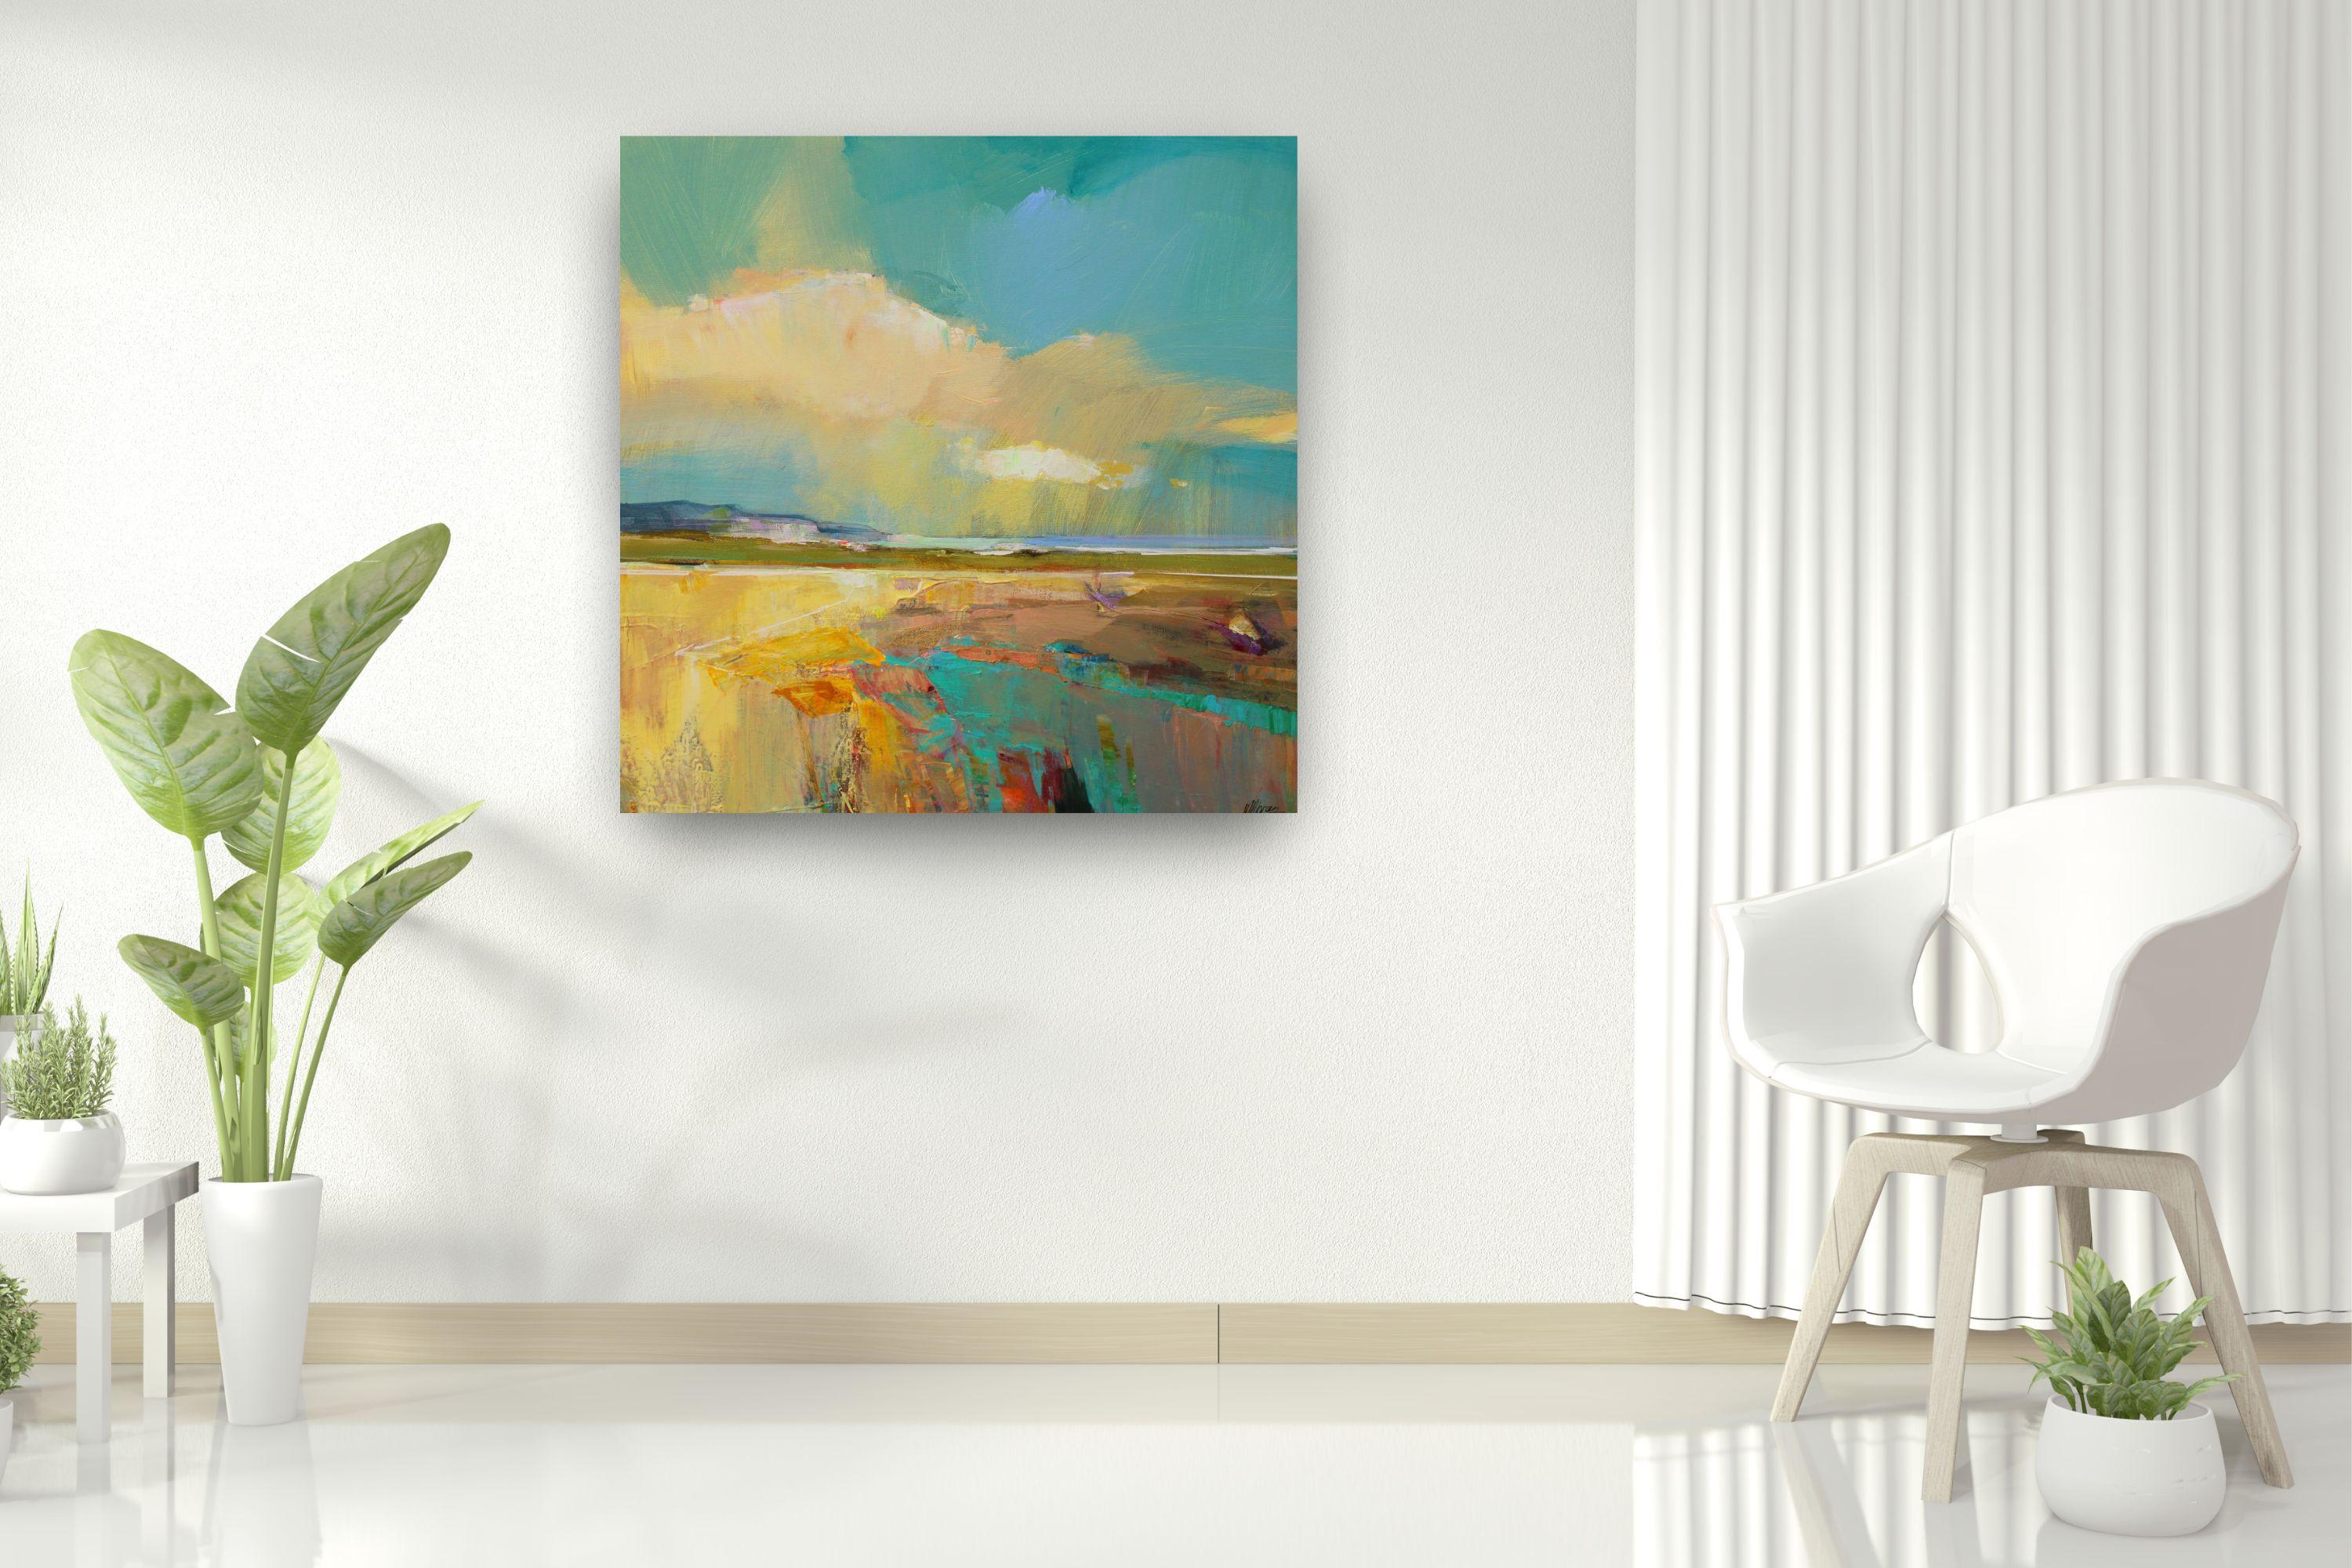 Enjoying Warm Glow 3 -original abstract contemporary landscape painting- modern For Sale 1